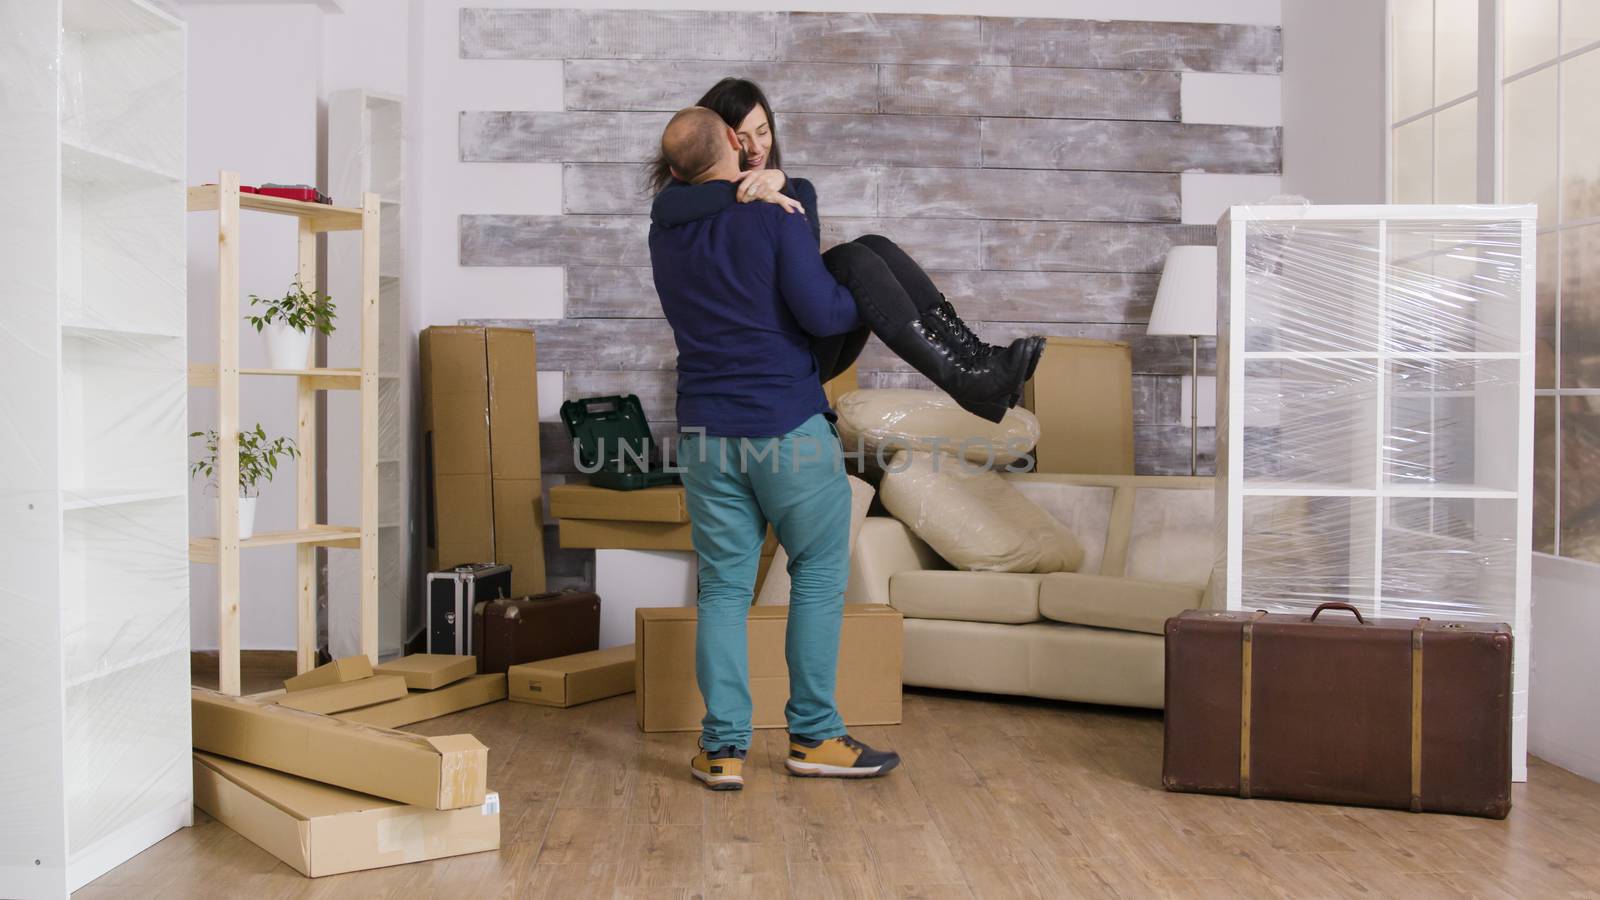 Excited boyfriend spining his girlfriend in their new apartment by DCStudio